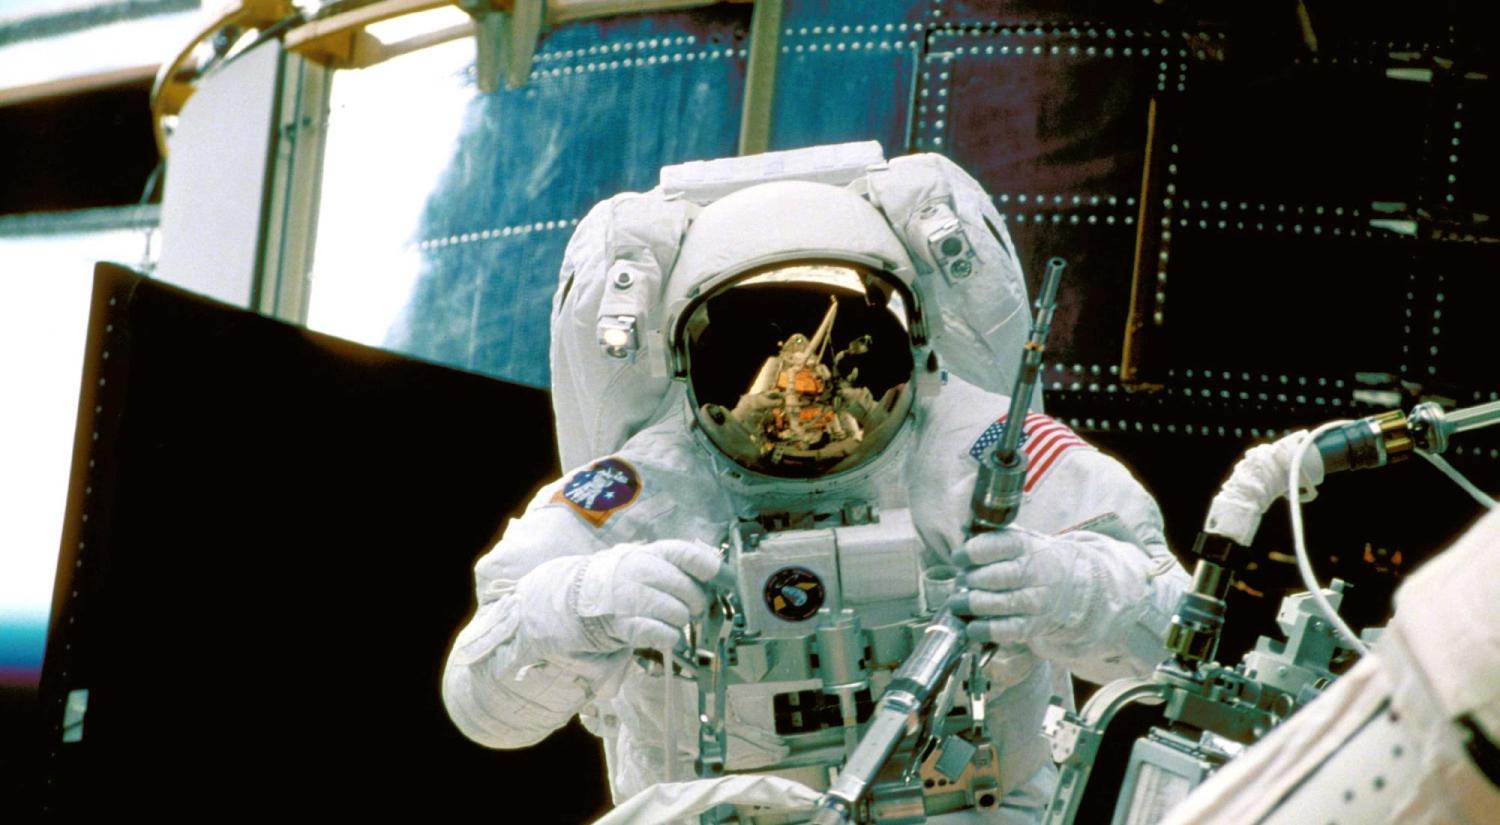 Astronaut dons a suit to work on the Hubble Space Telescope